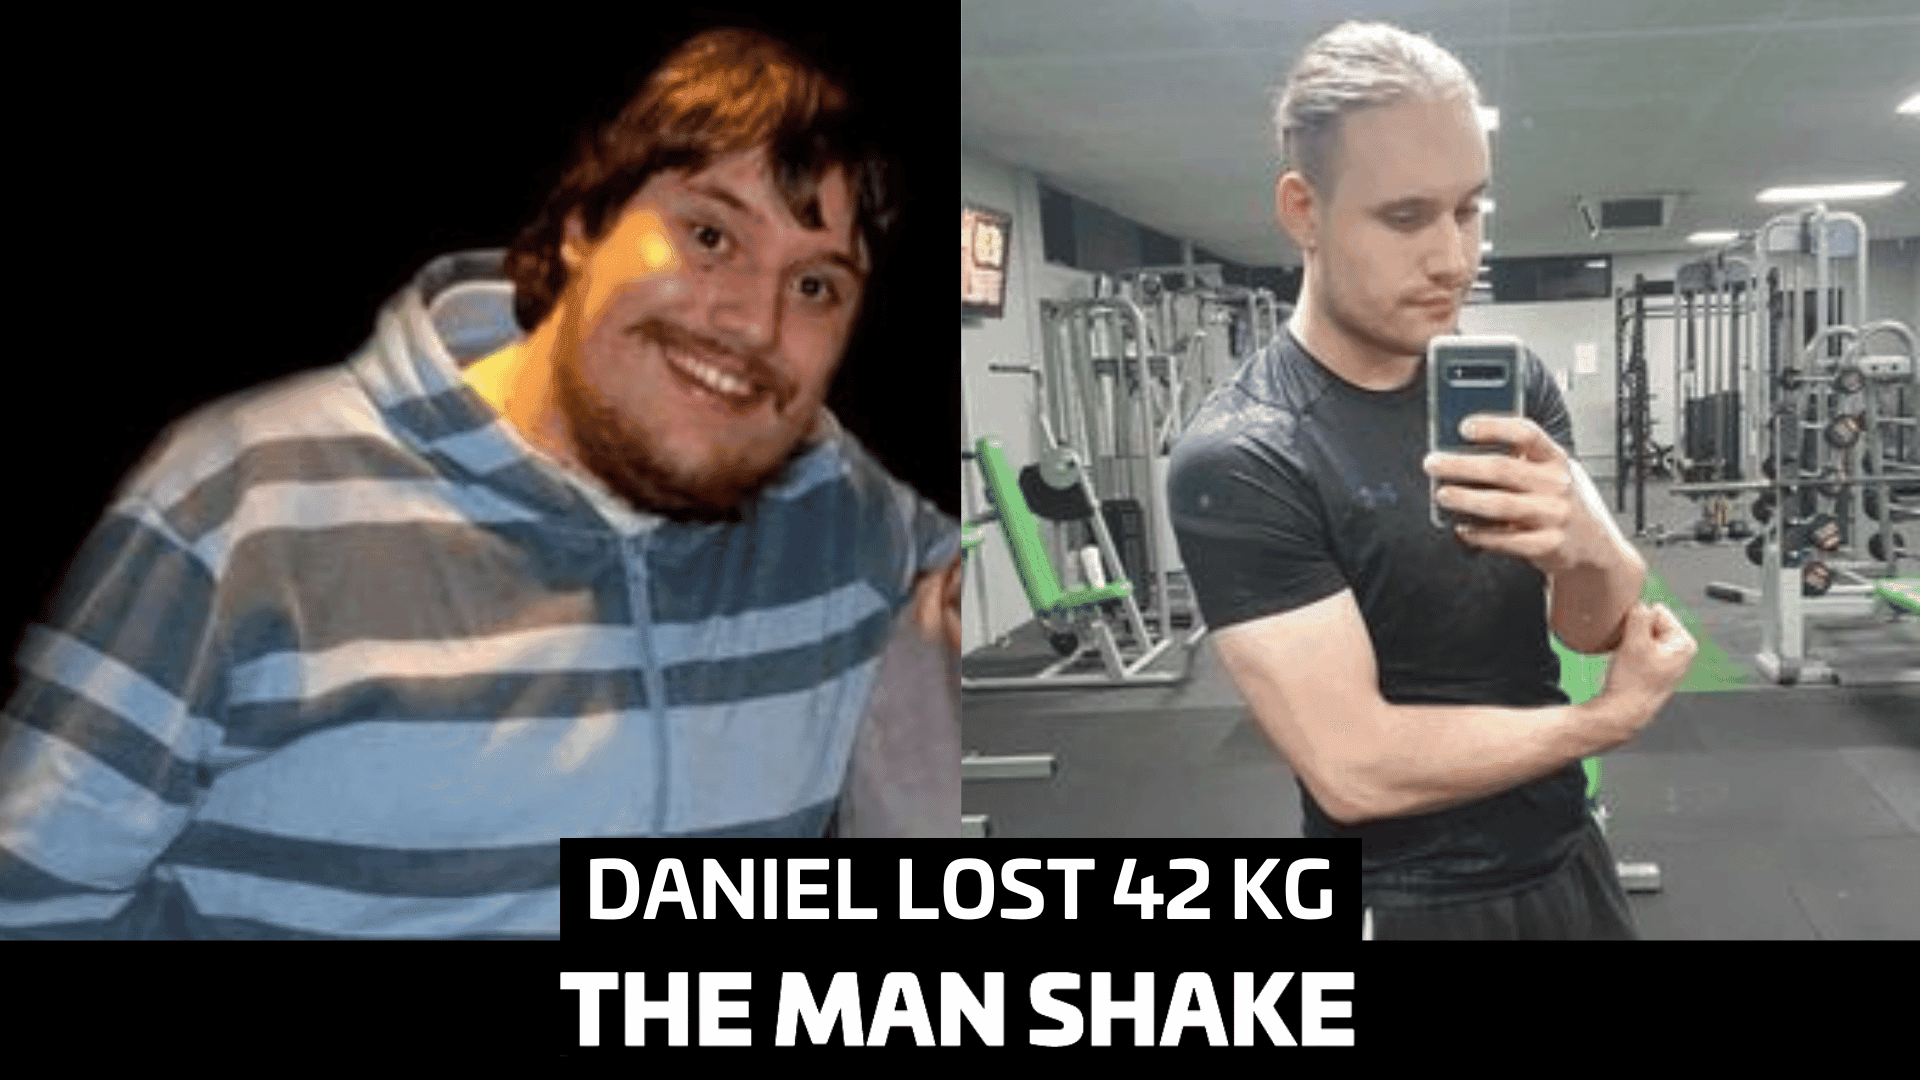 Daniel knew something had to change after a tragic life event